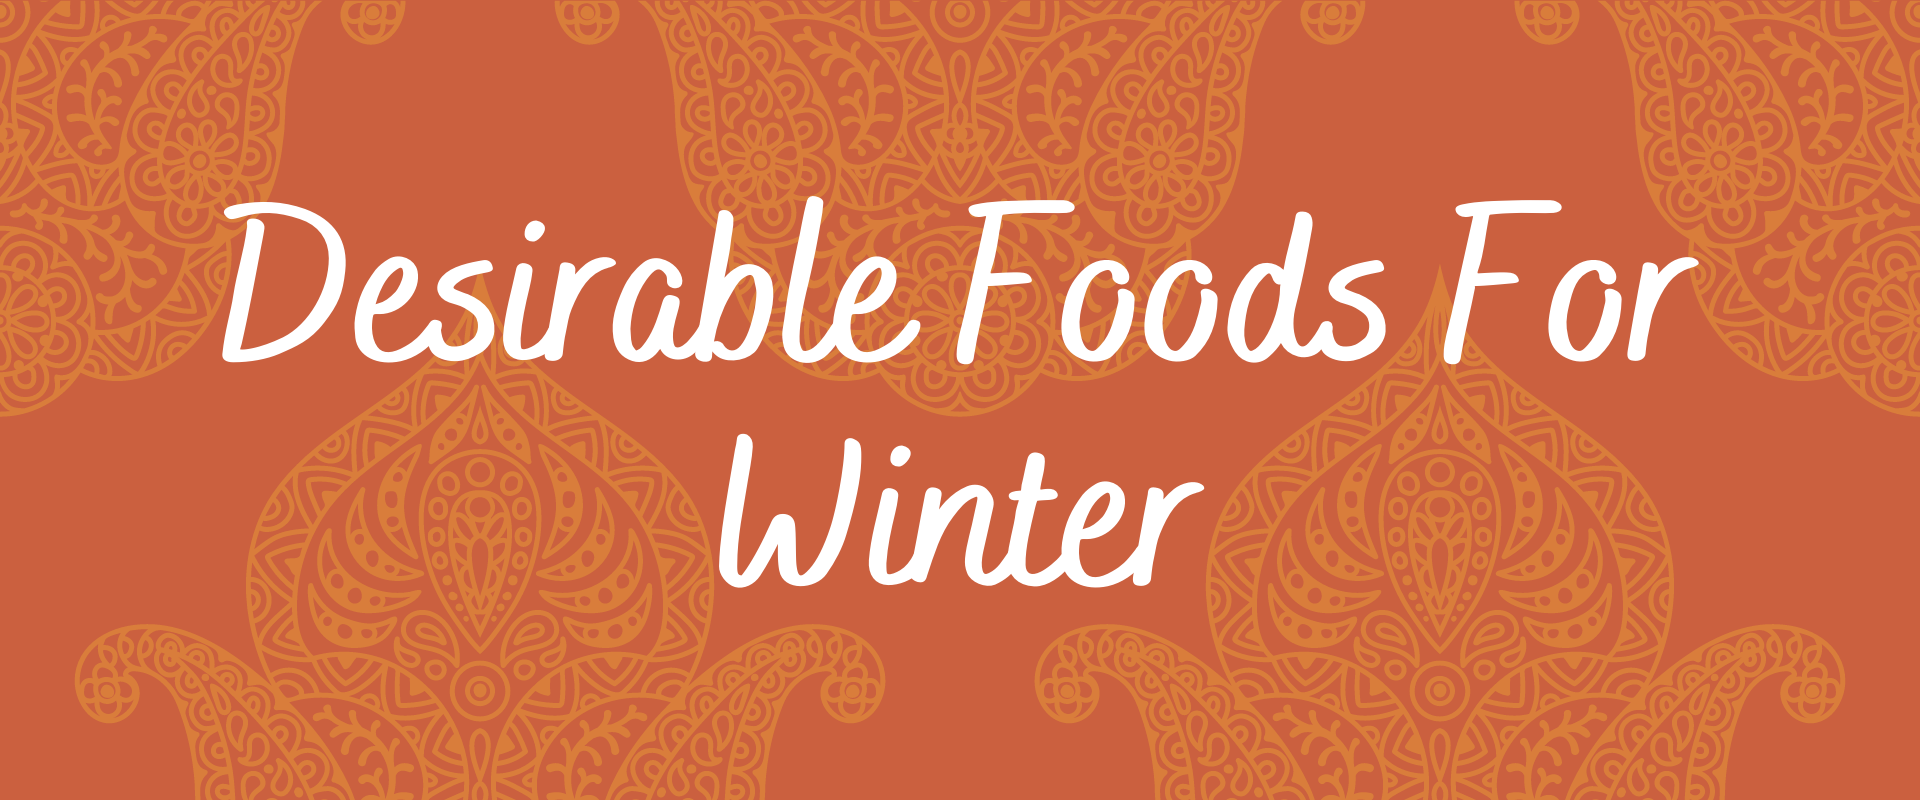 Desirable Foods For Winter